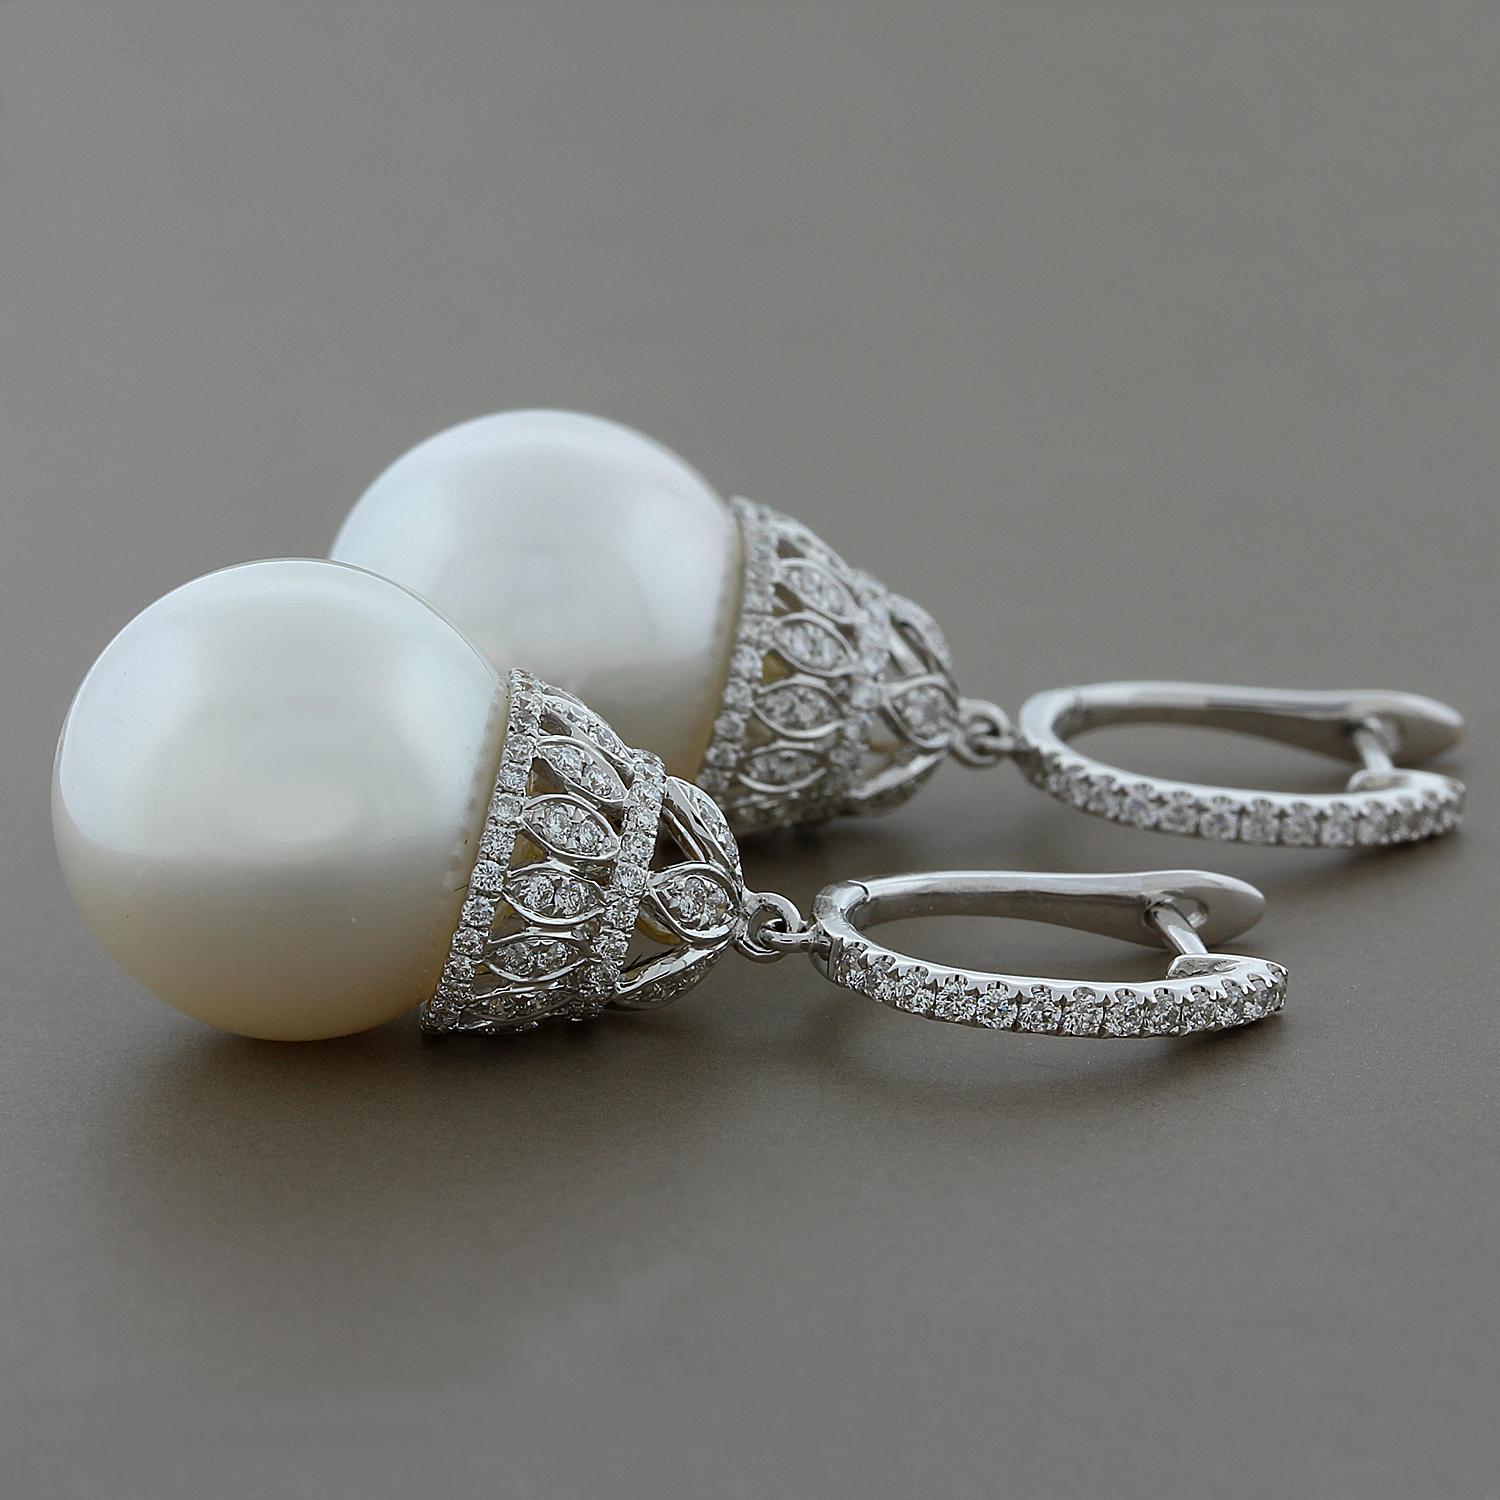 These elegant and feminine drop earrings feature two lustrous 16 mm South Sea pearls hanging from a royal design diamond and 18K white gold basket drop.  A total of 1.00 carat of VS quality diamonds are used. 

Earring Length: 1 5/8 inches
